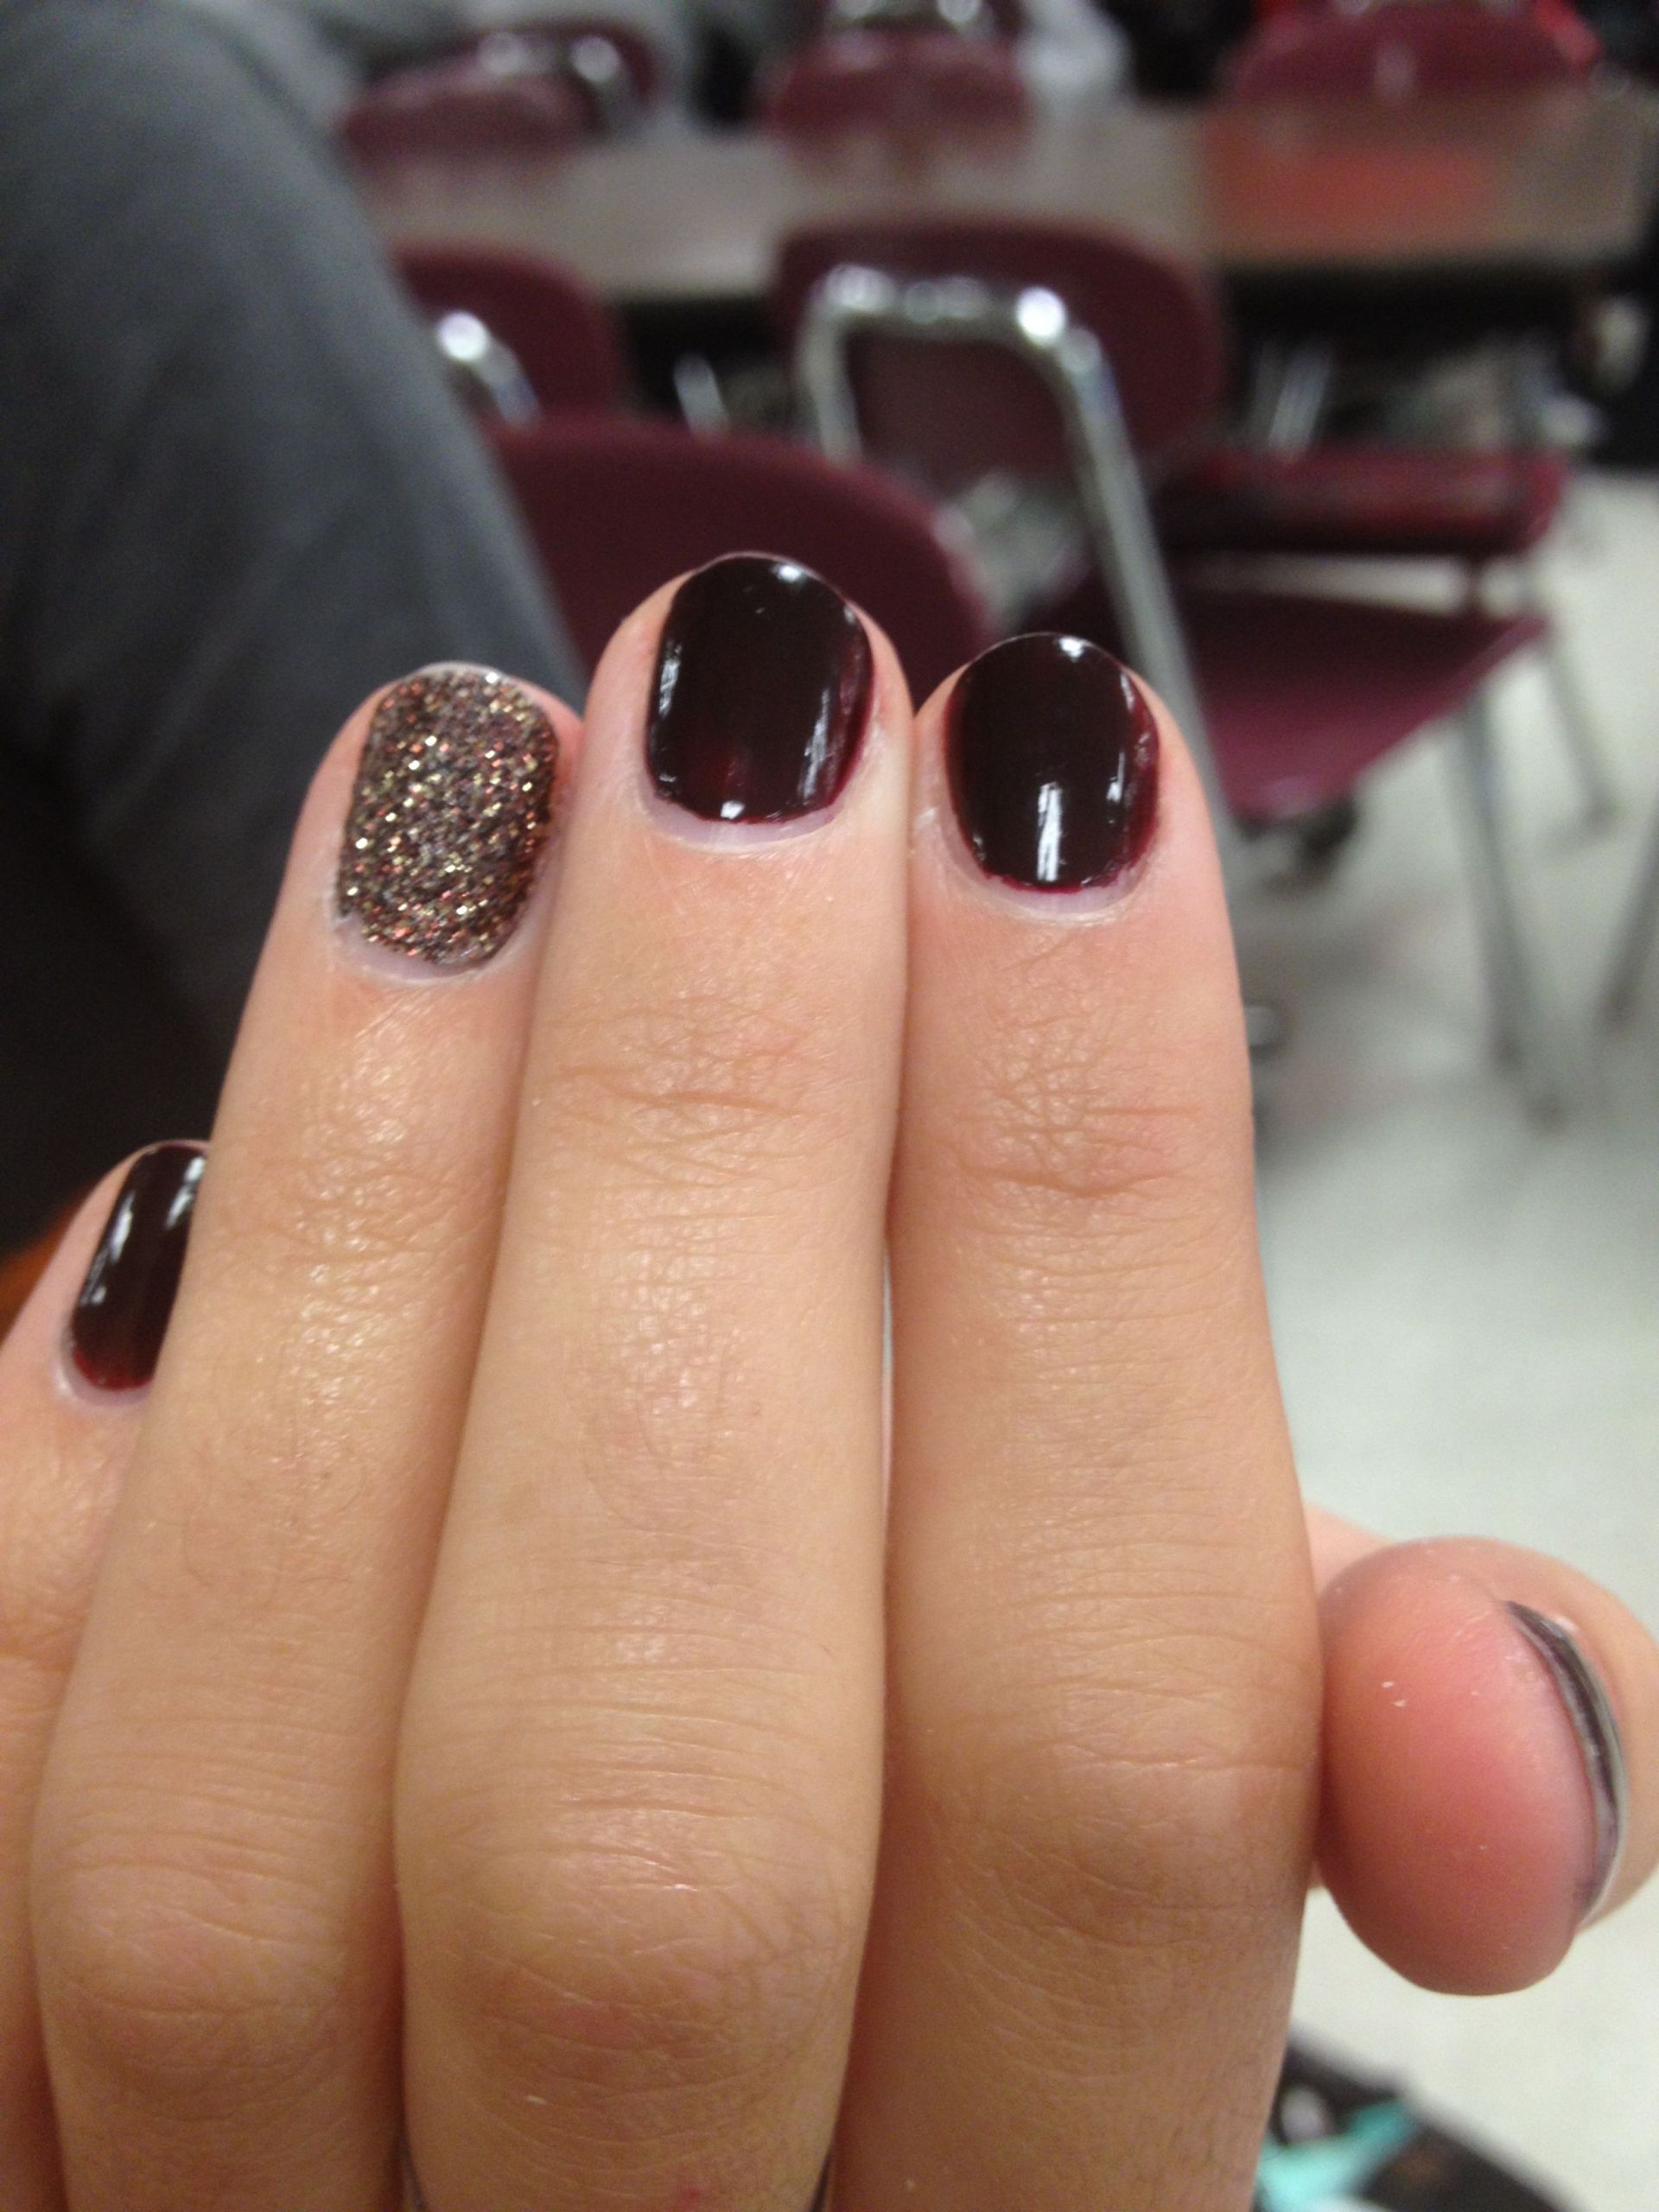 Pretty Nails Raleigh
 The perfect fall nails Dark maroon and silver glitter